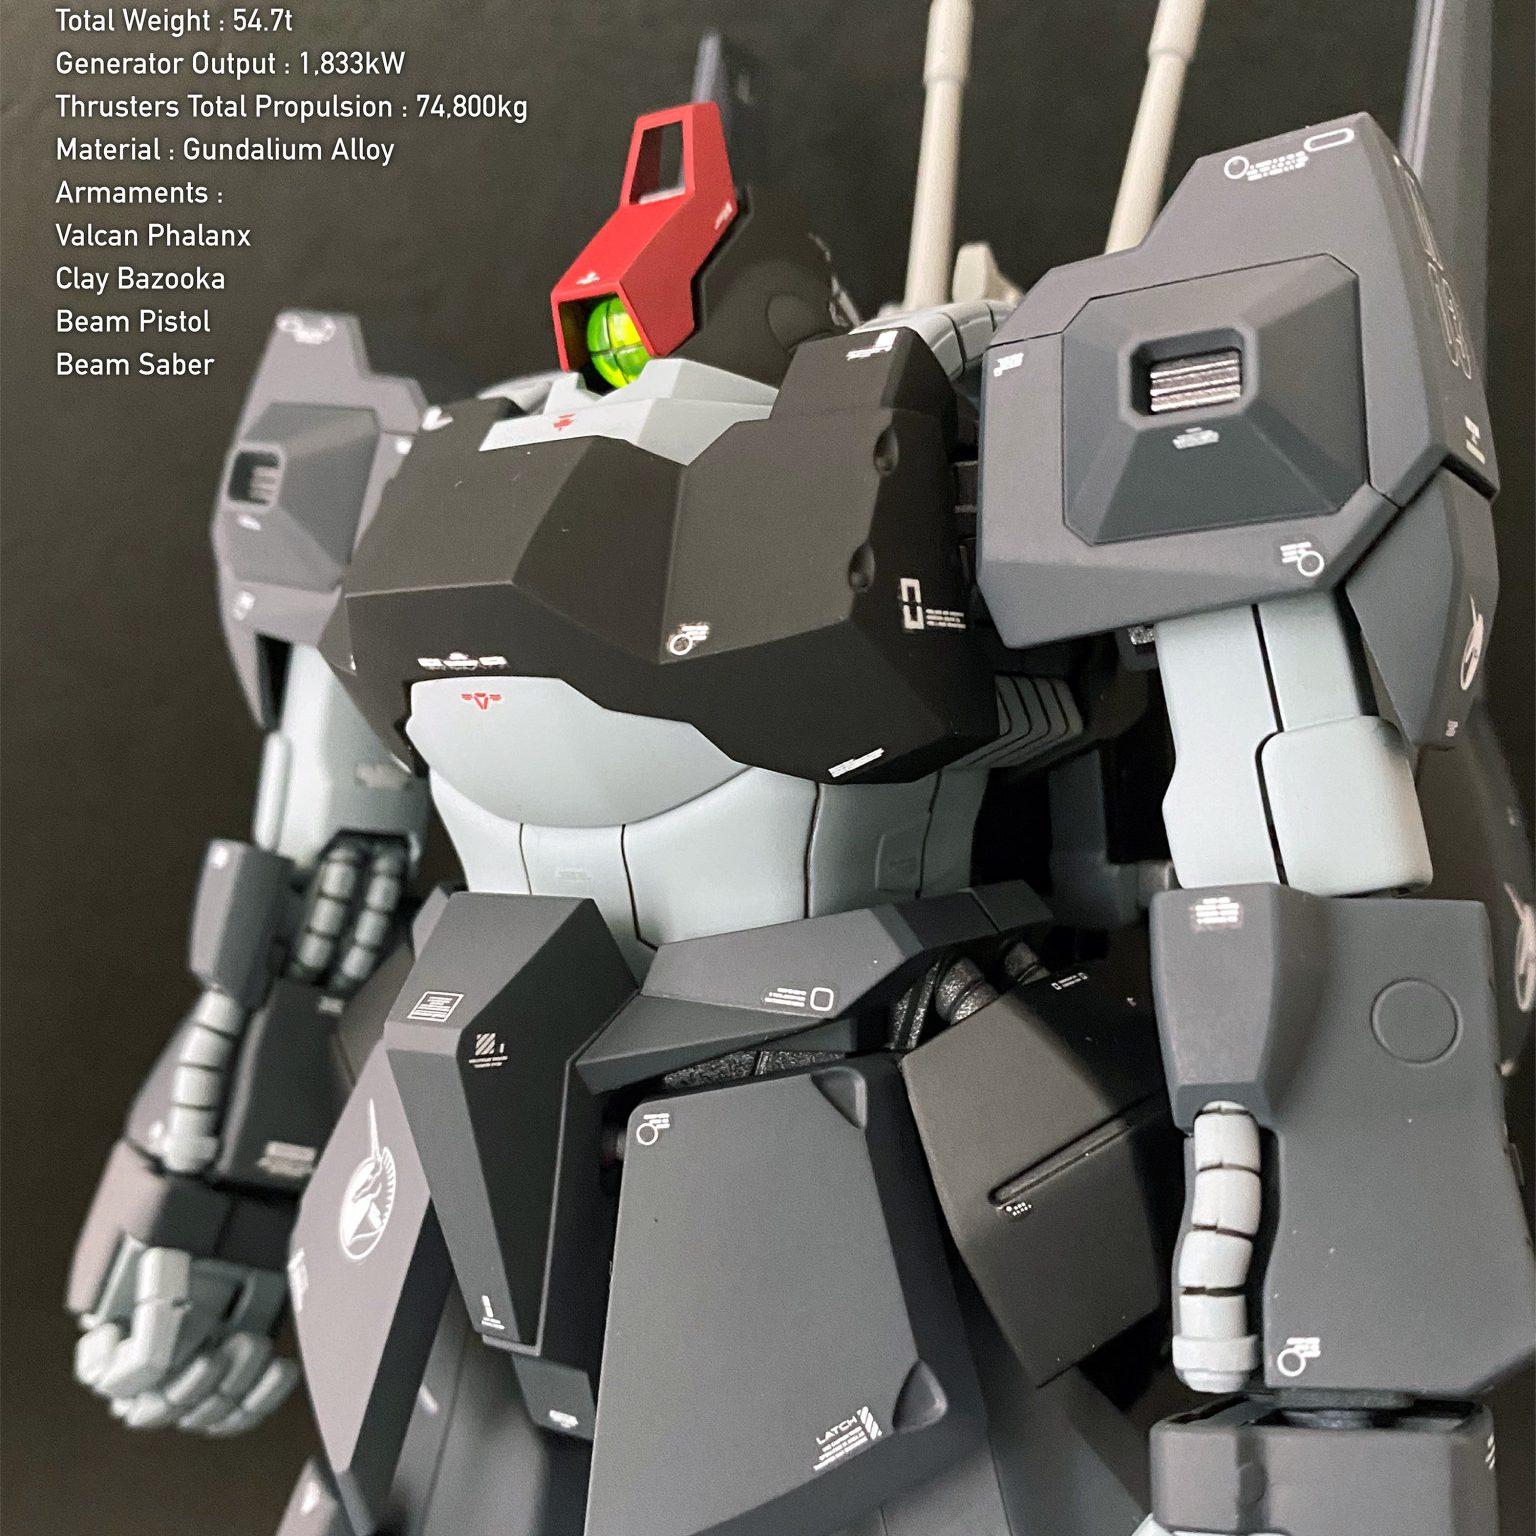 MG RMS-099 エゥーゴ リック・ディアス（クワトロ・バジーナカラー）